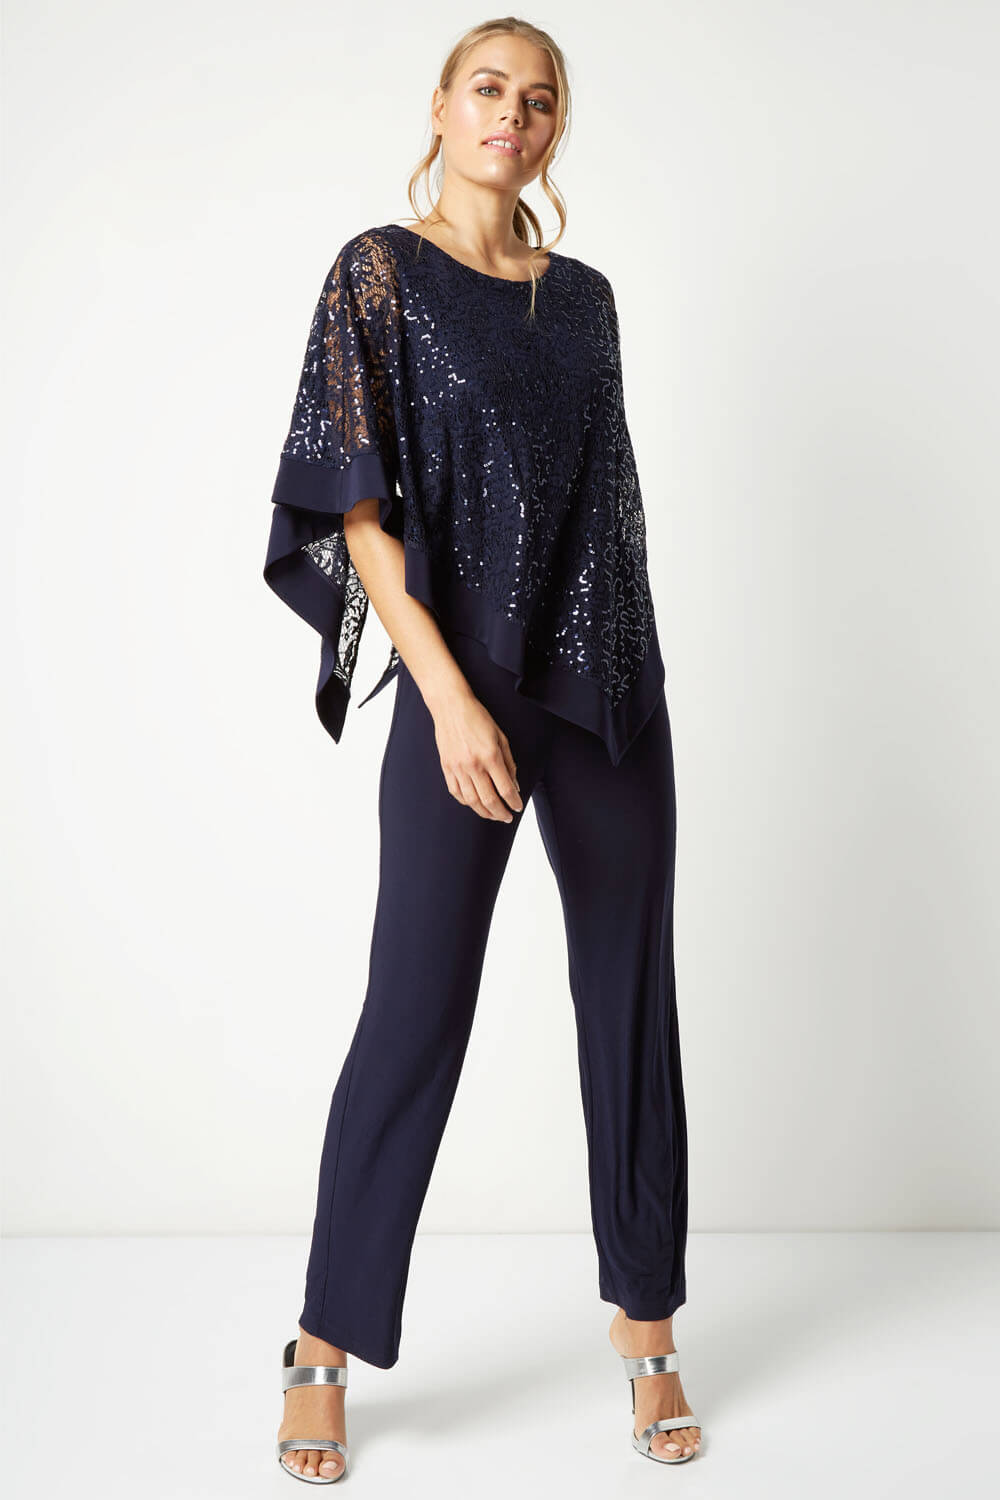 Navy  Sequin Overlay Jumpsuit, Image 2 of 4